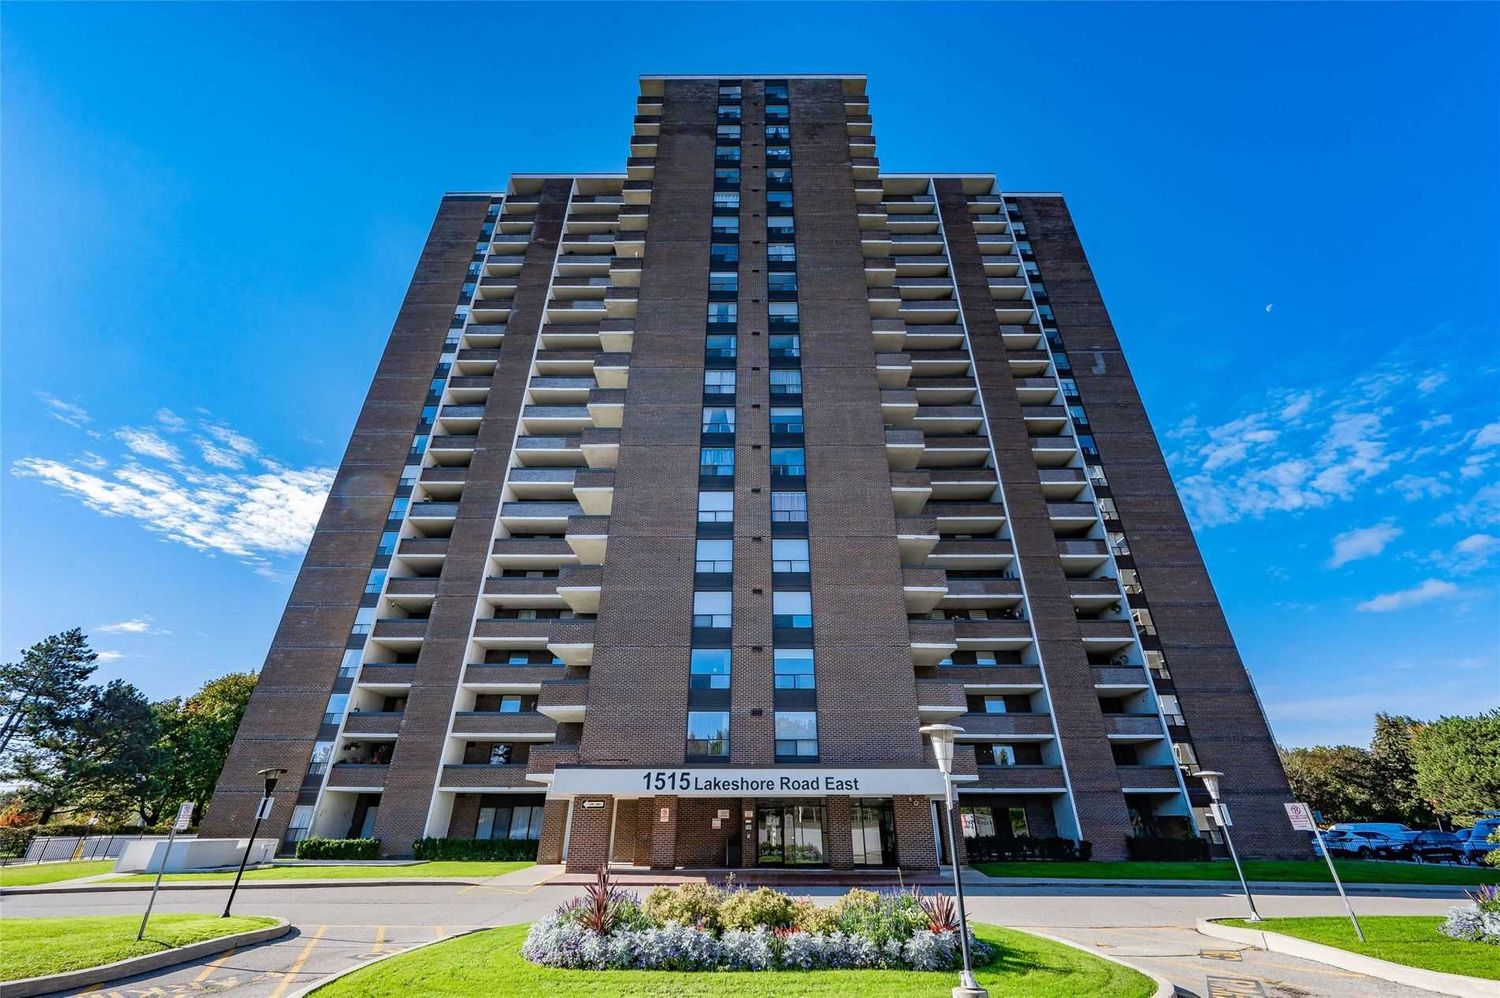 1515 Lakeshore Road E. 1515 Lakeshore Road East Condos is located in  Mississauga, Toronto - image #2 of 3